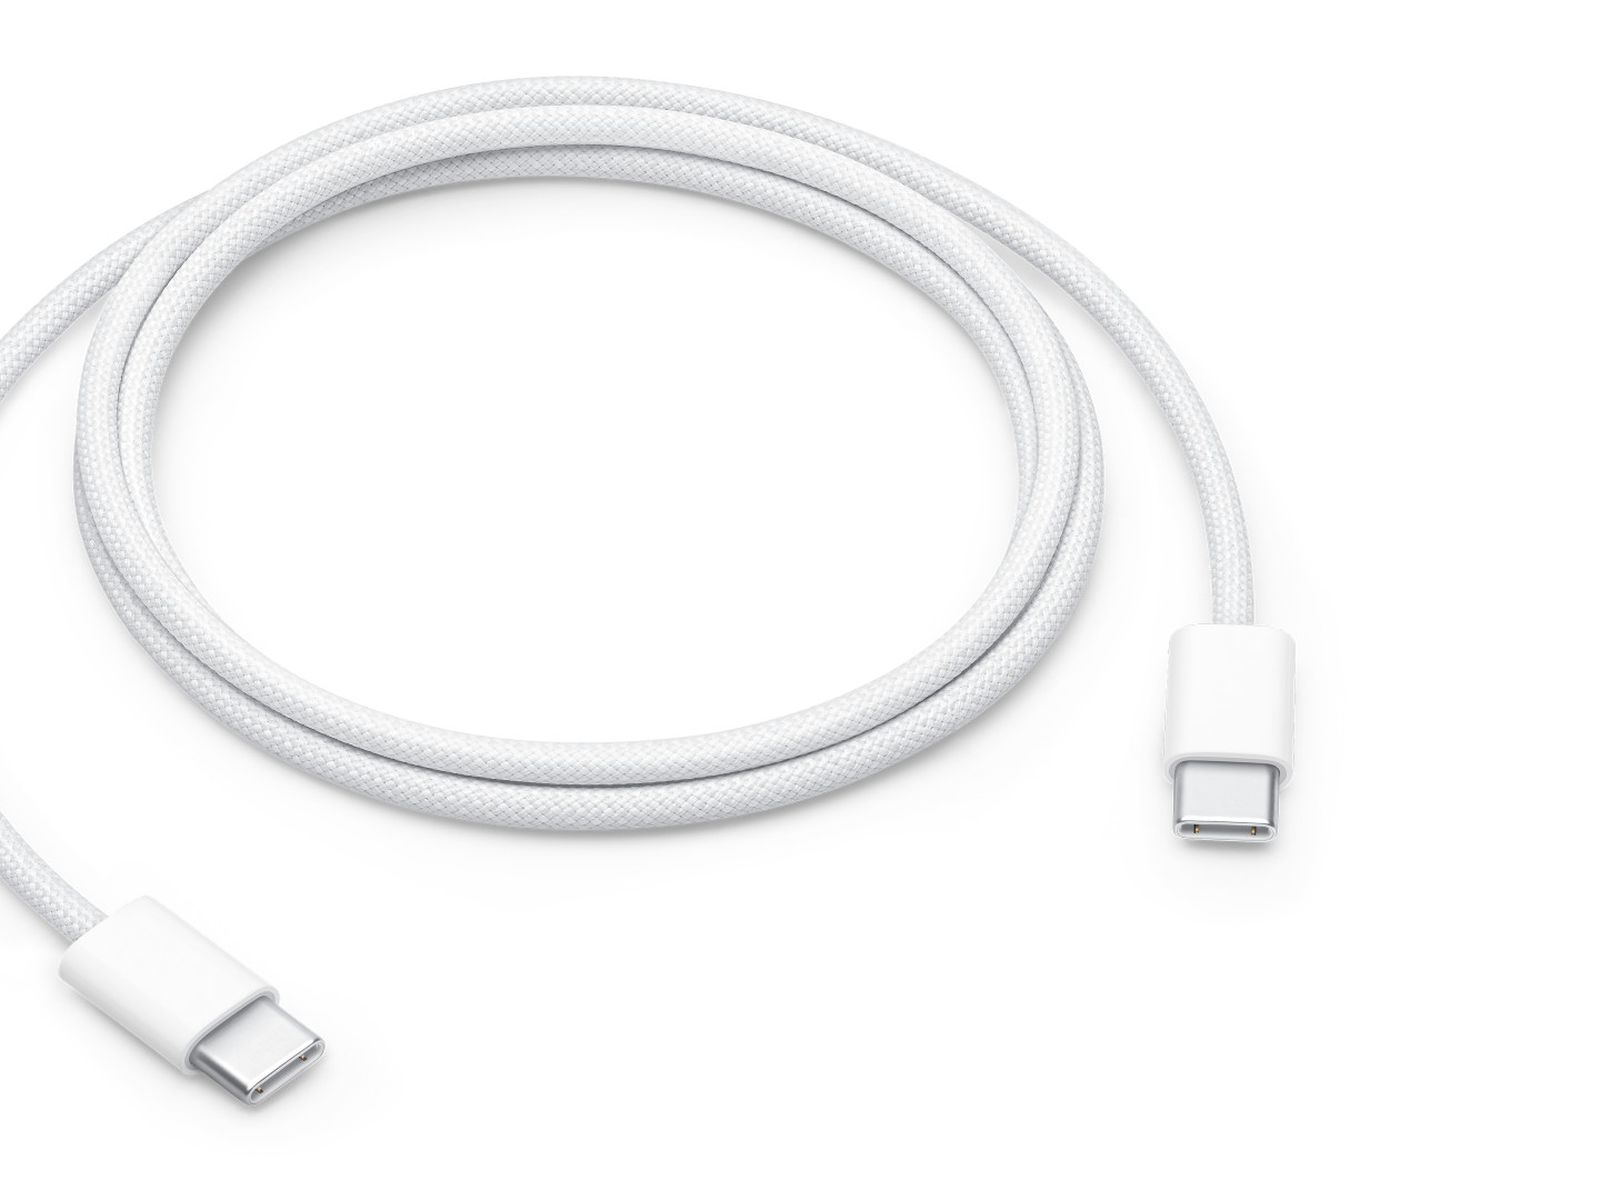 Samsung C to C Cable (White) - Price, Reviews & Specs